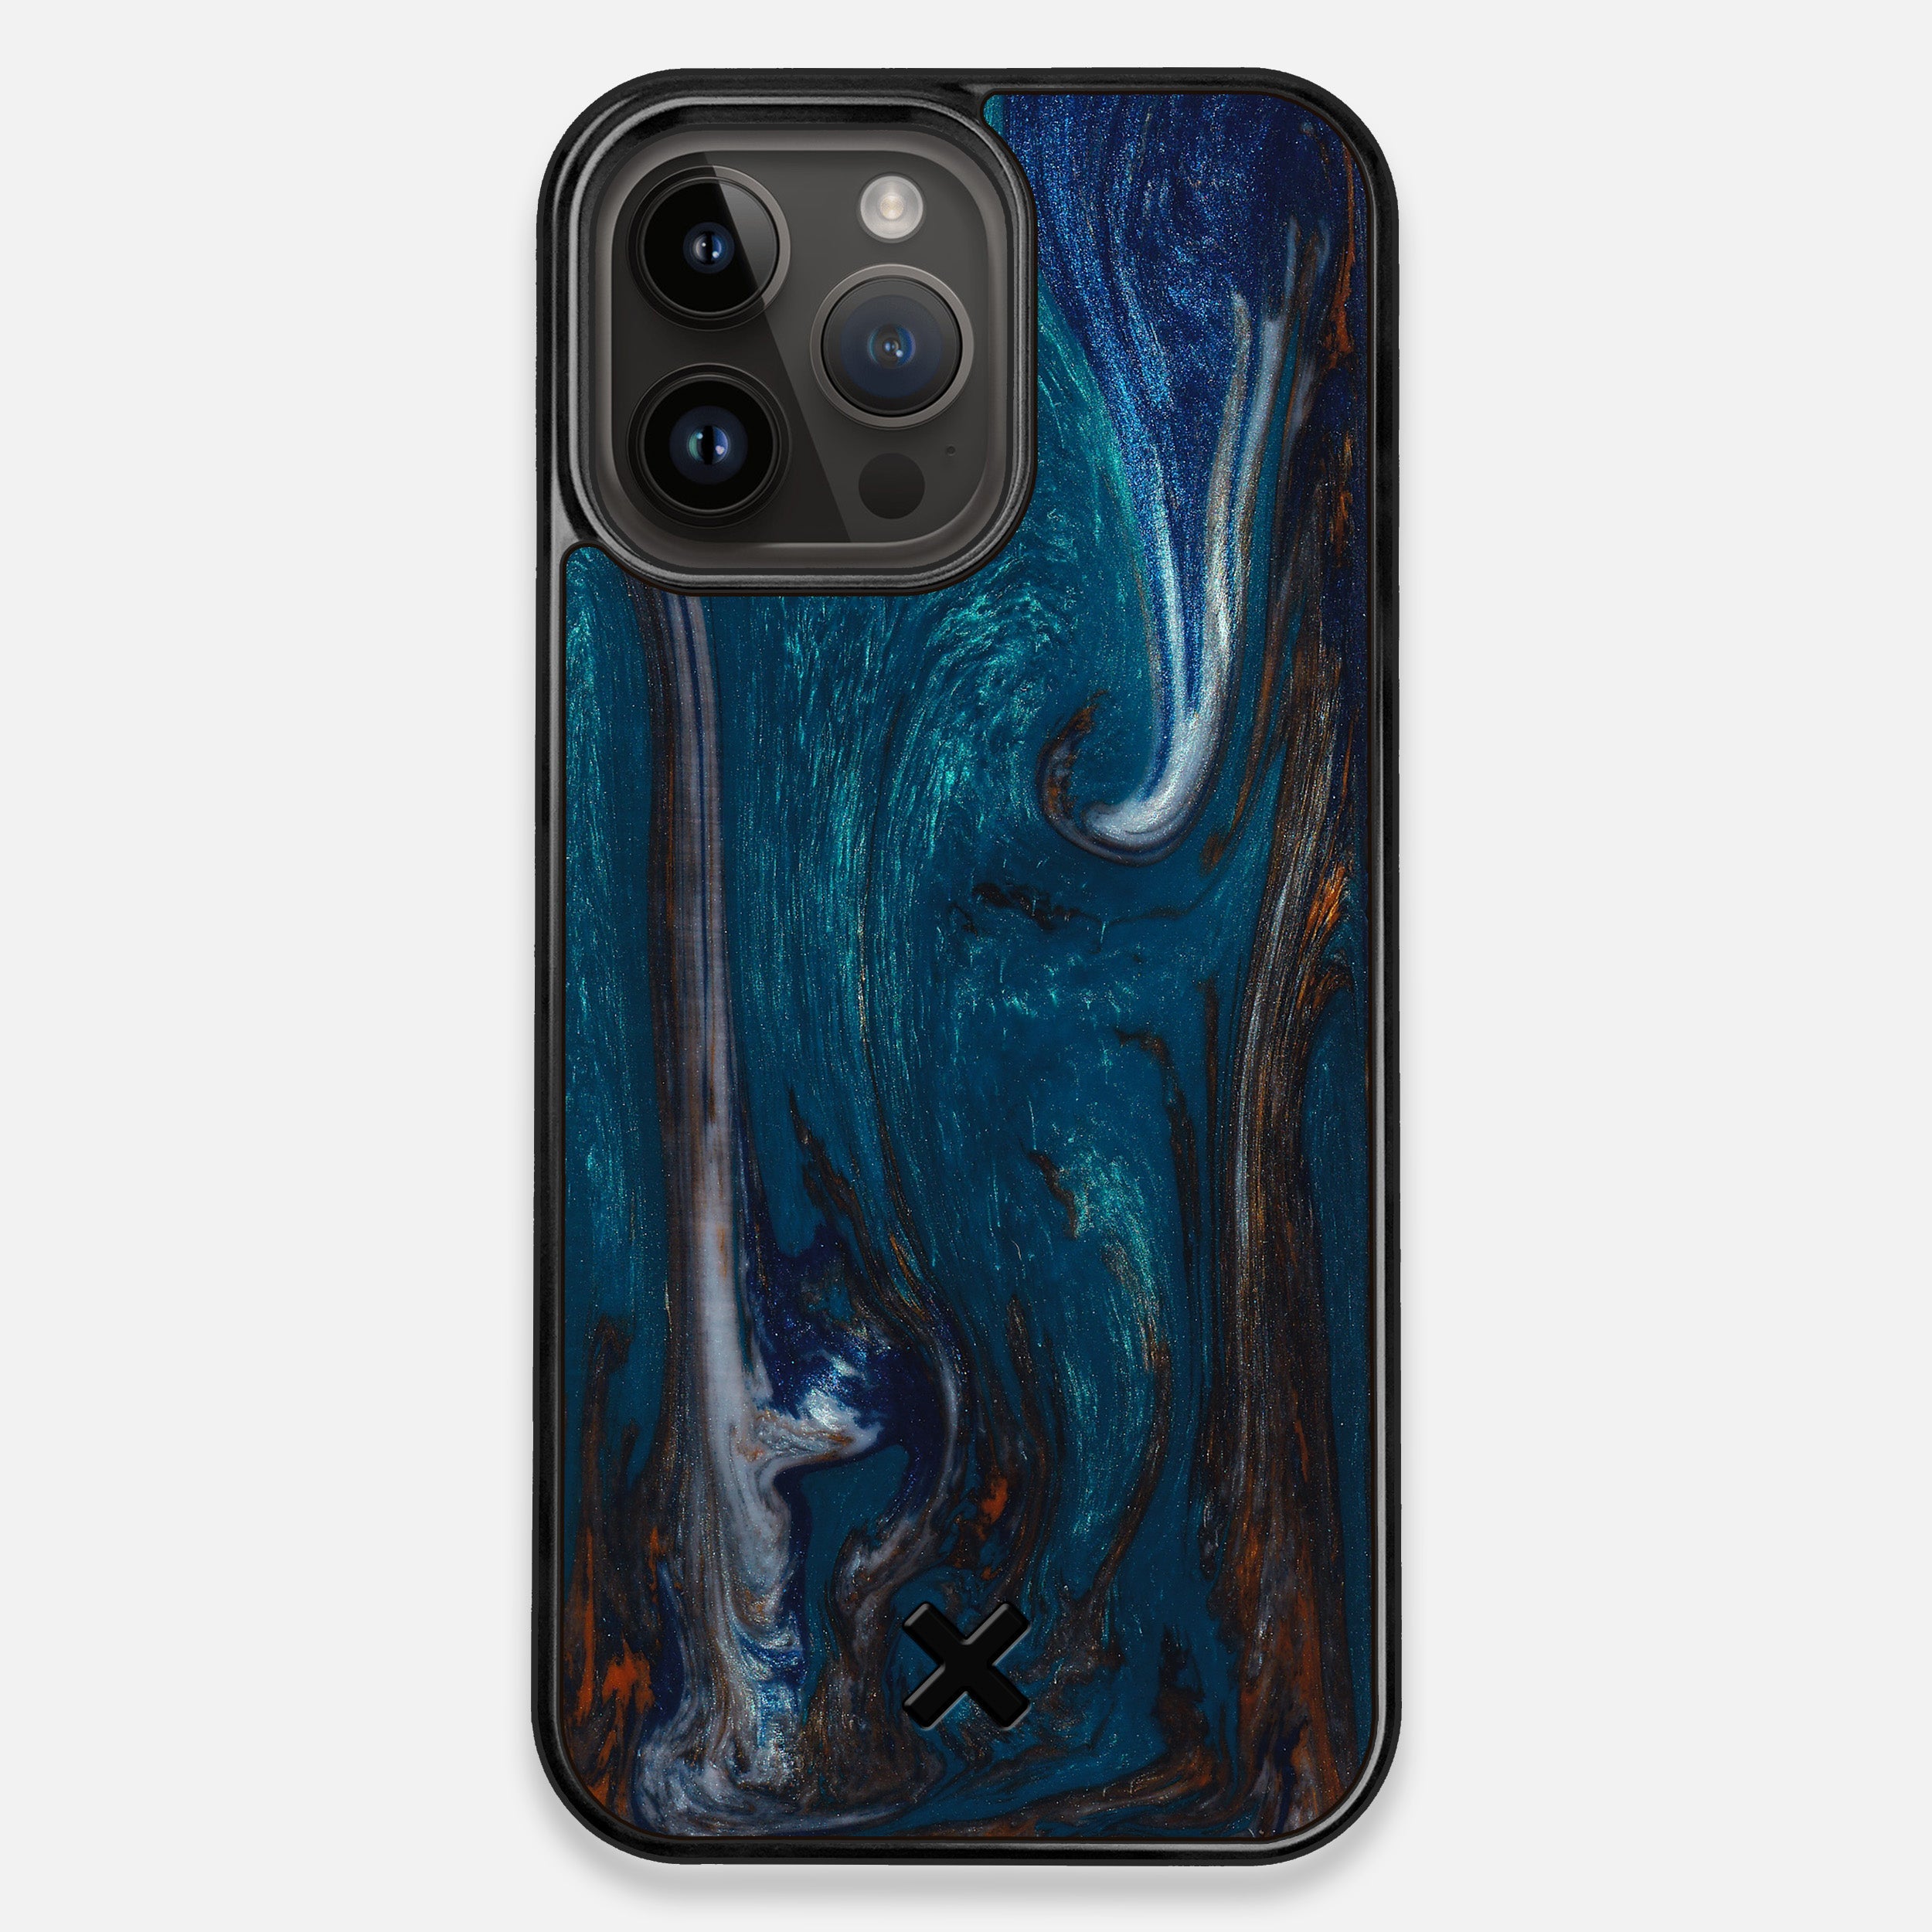 One & Only - Wood and Resin Case - #01656